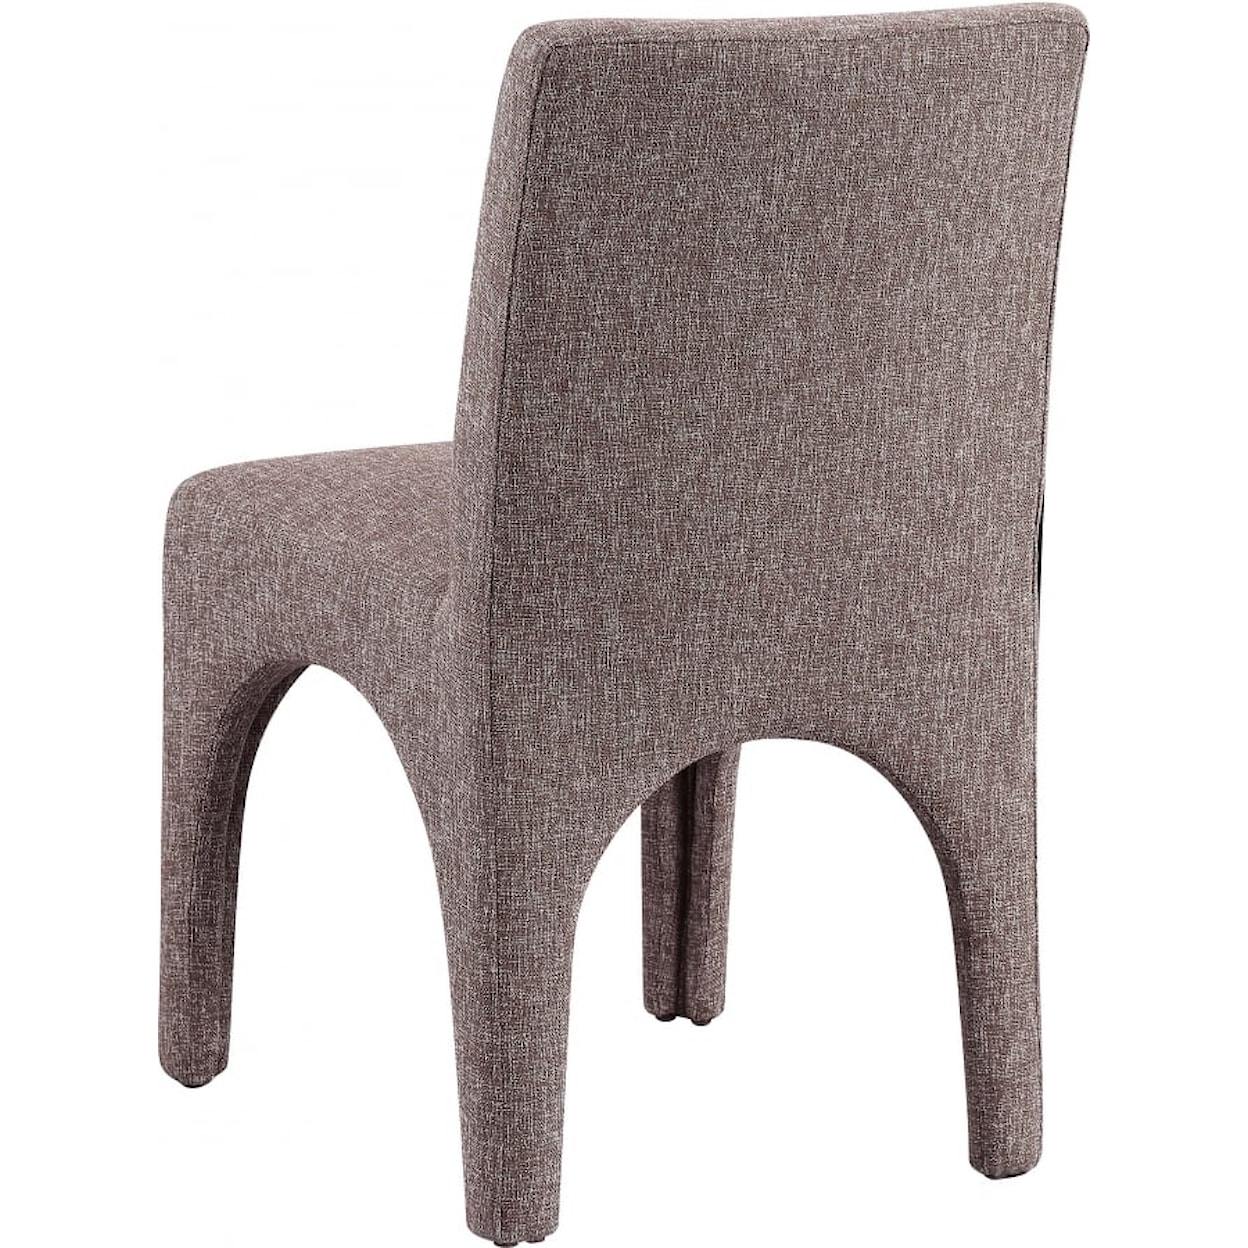 Meridian Furniture Gramercy Dining Chair